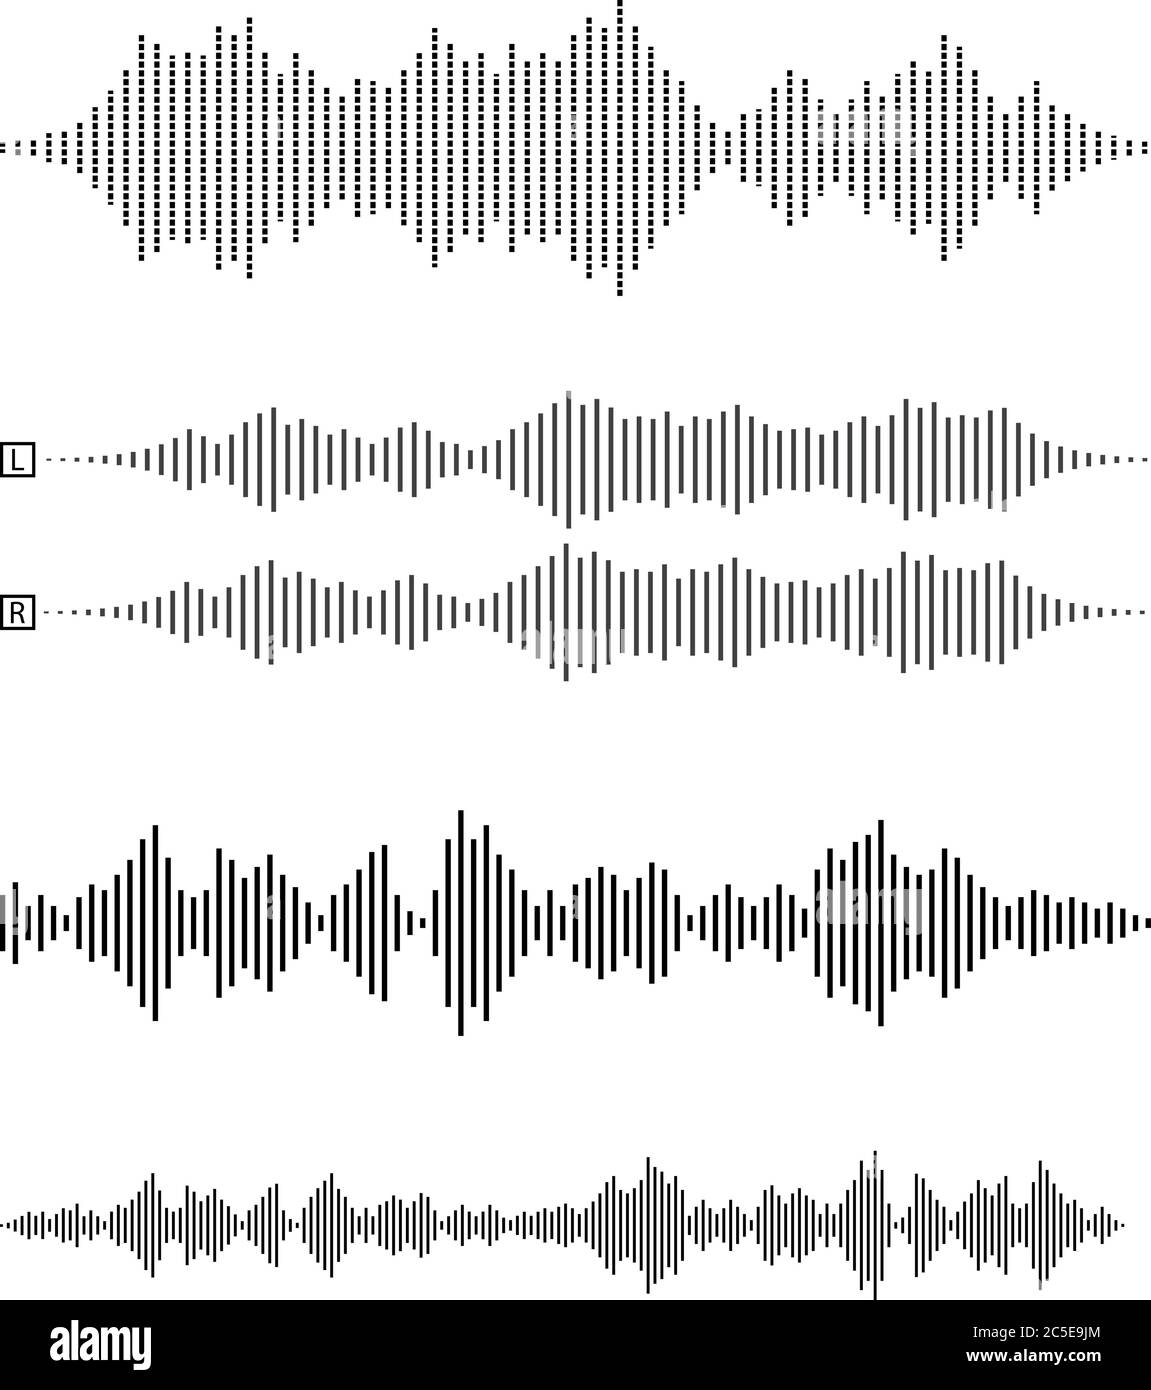 set of audio waveforms or sound waves, speech, noise or music symbol vector illustration Stock Vector